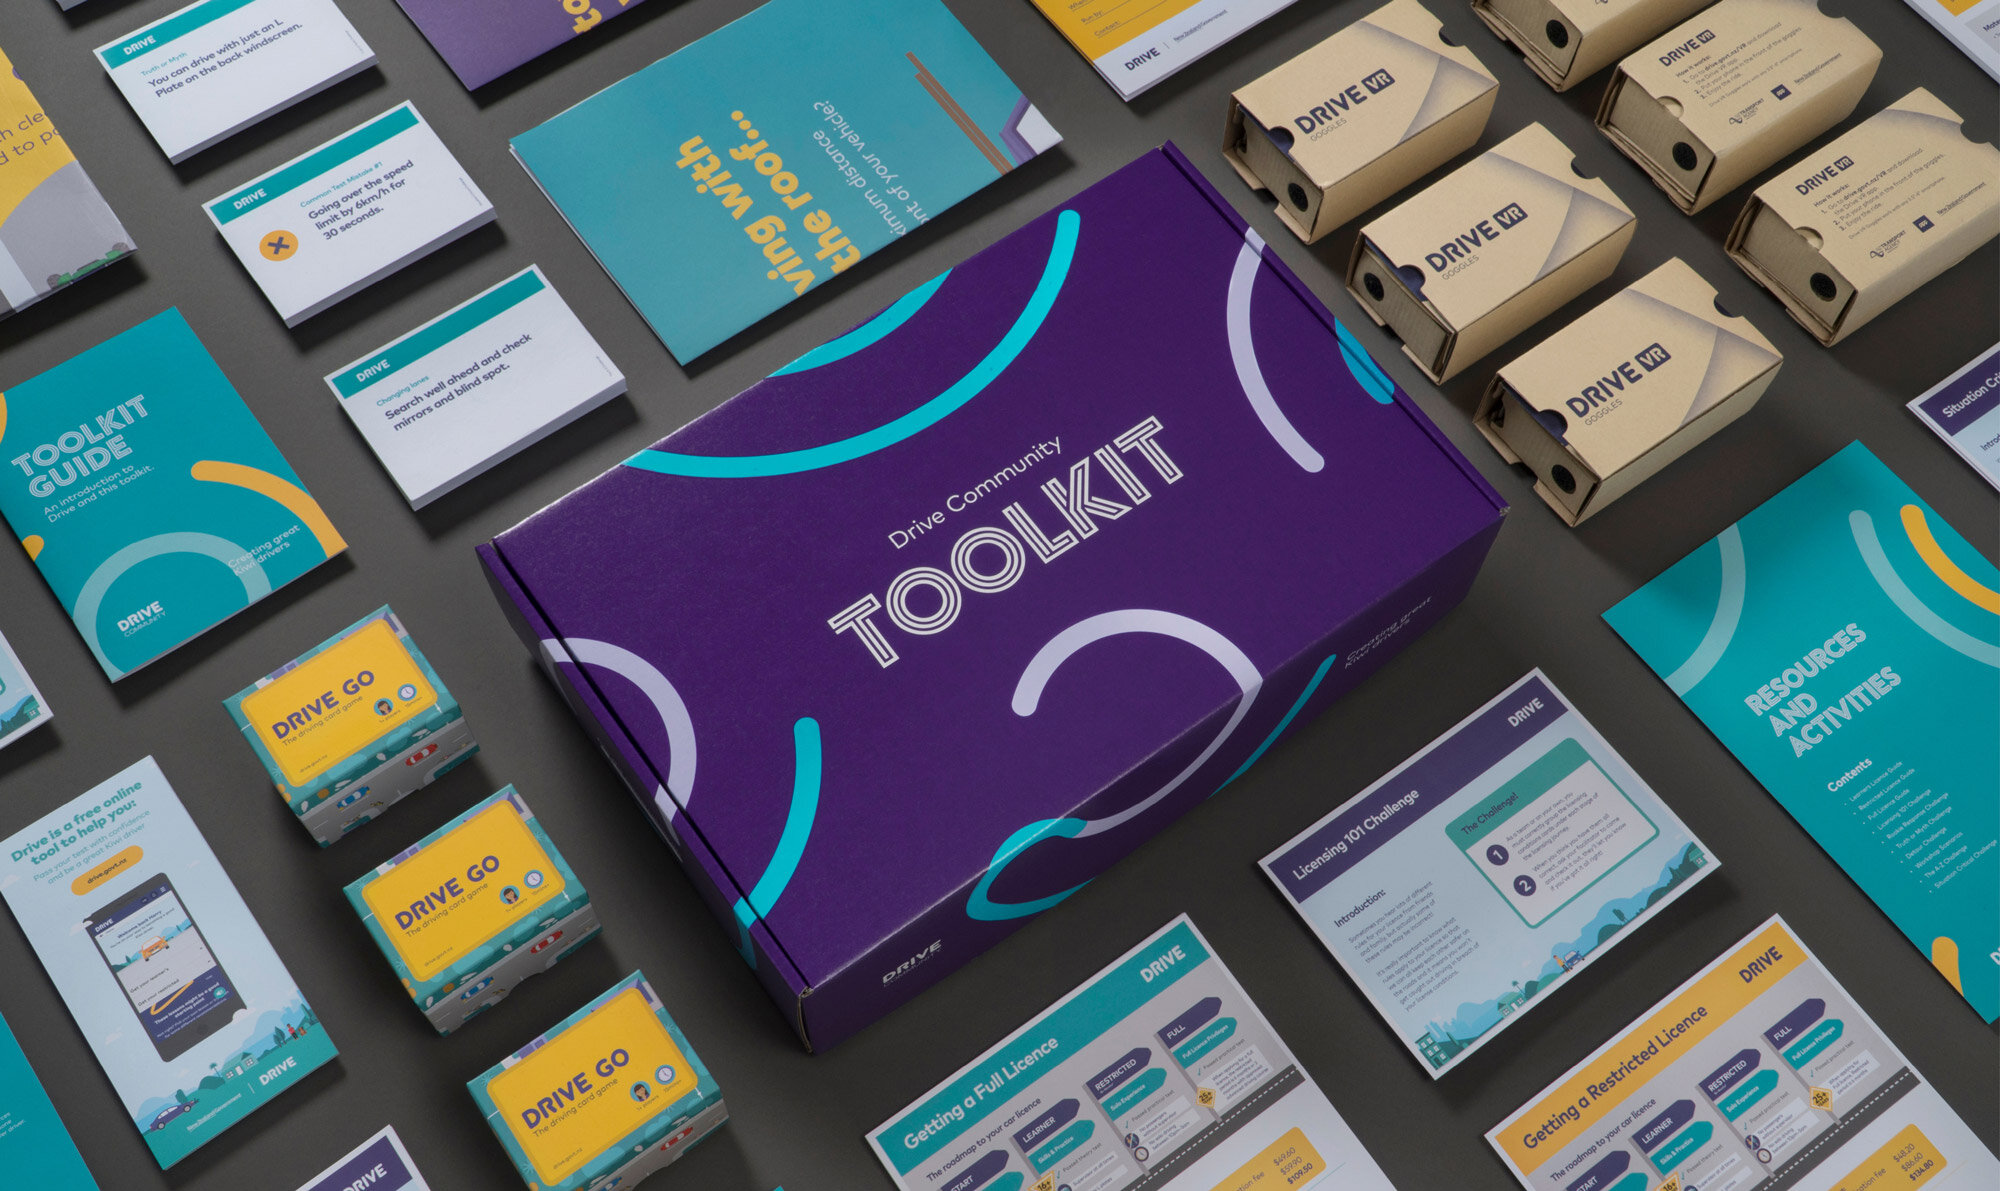  The Drive Community toolkit is a suite of interactive resources for driving educators. Designed to be intuitive, fun and memorable.  It won Gold at the Best Awards. Made with Strategy Creative. 